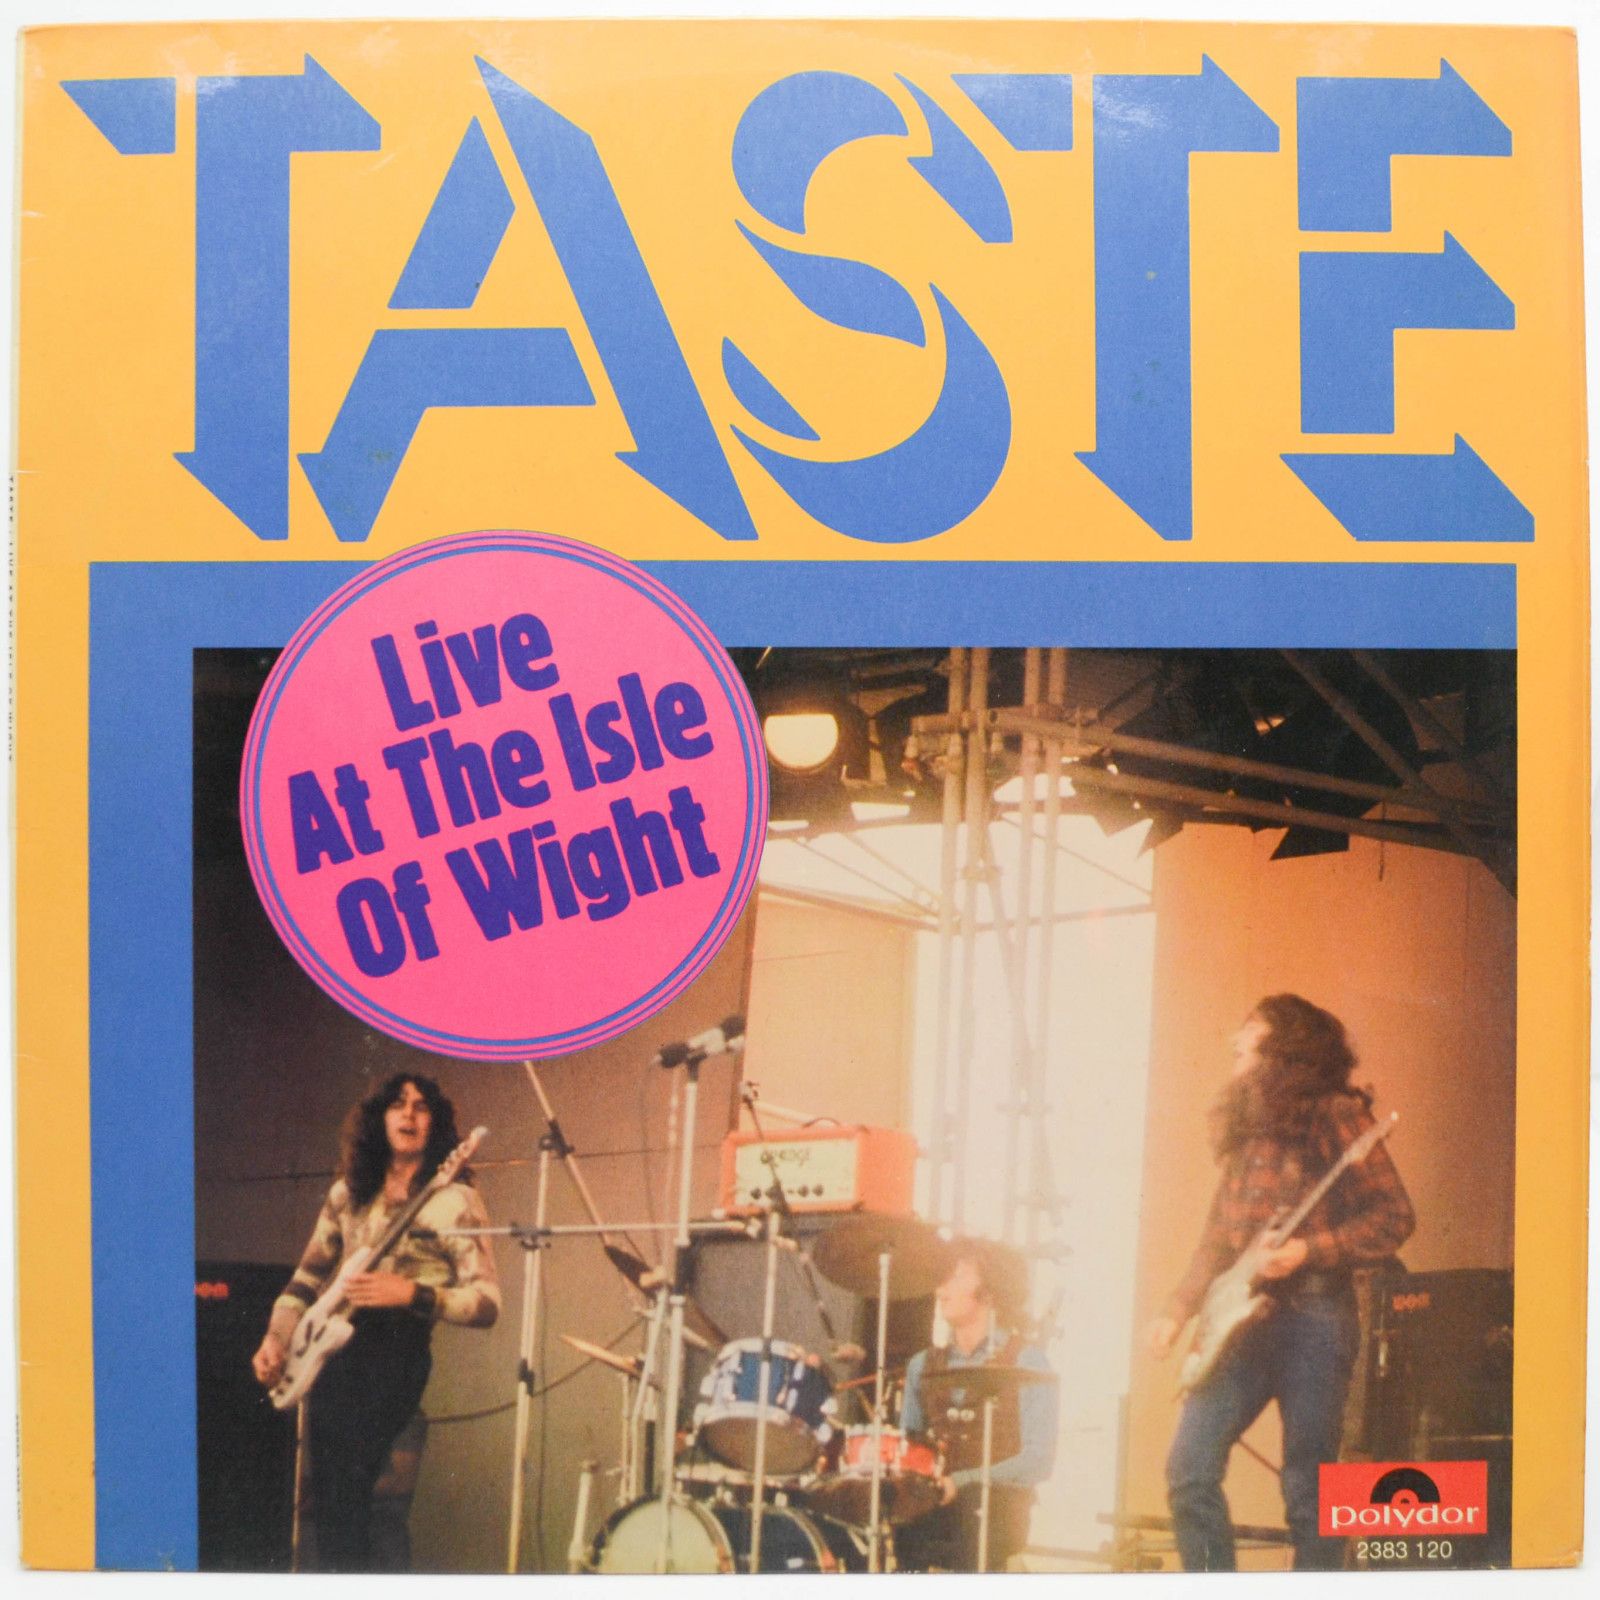 Taste — Live At The Isle Of Wight, 1972